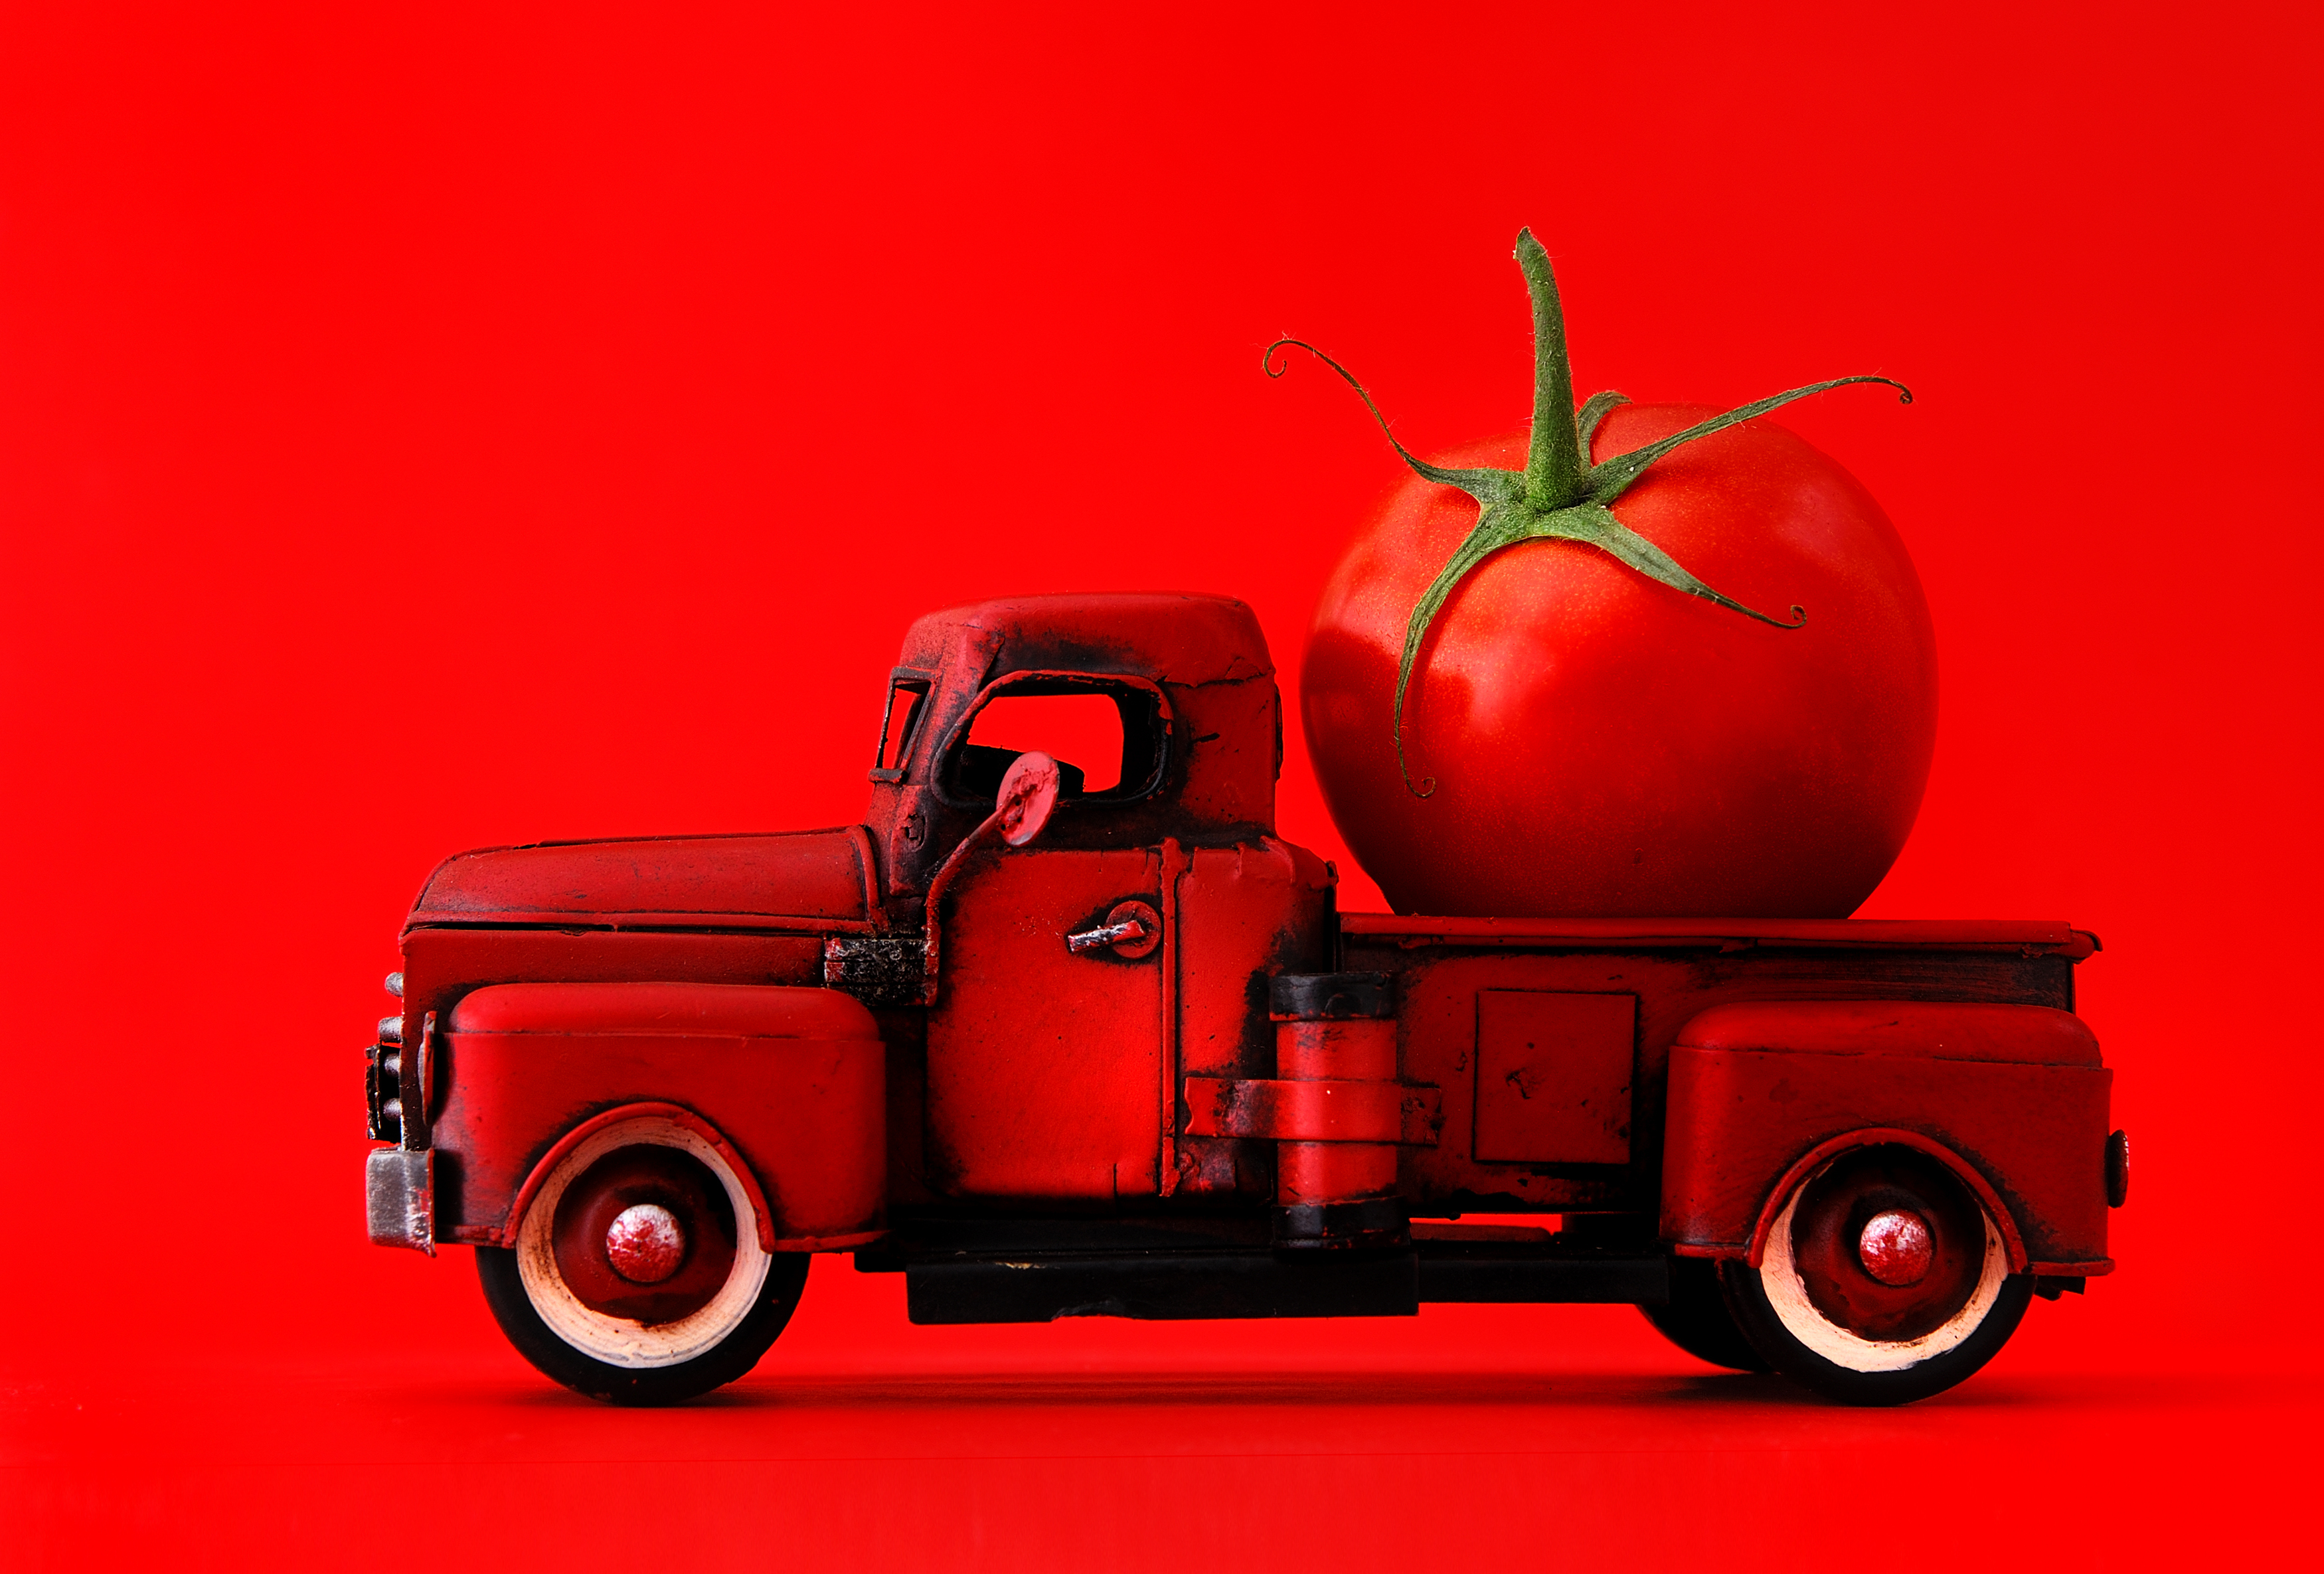 pickup truck carrying giant tomato